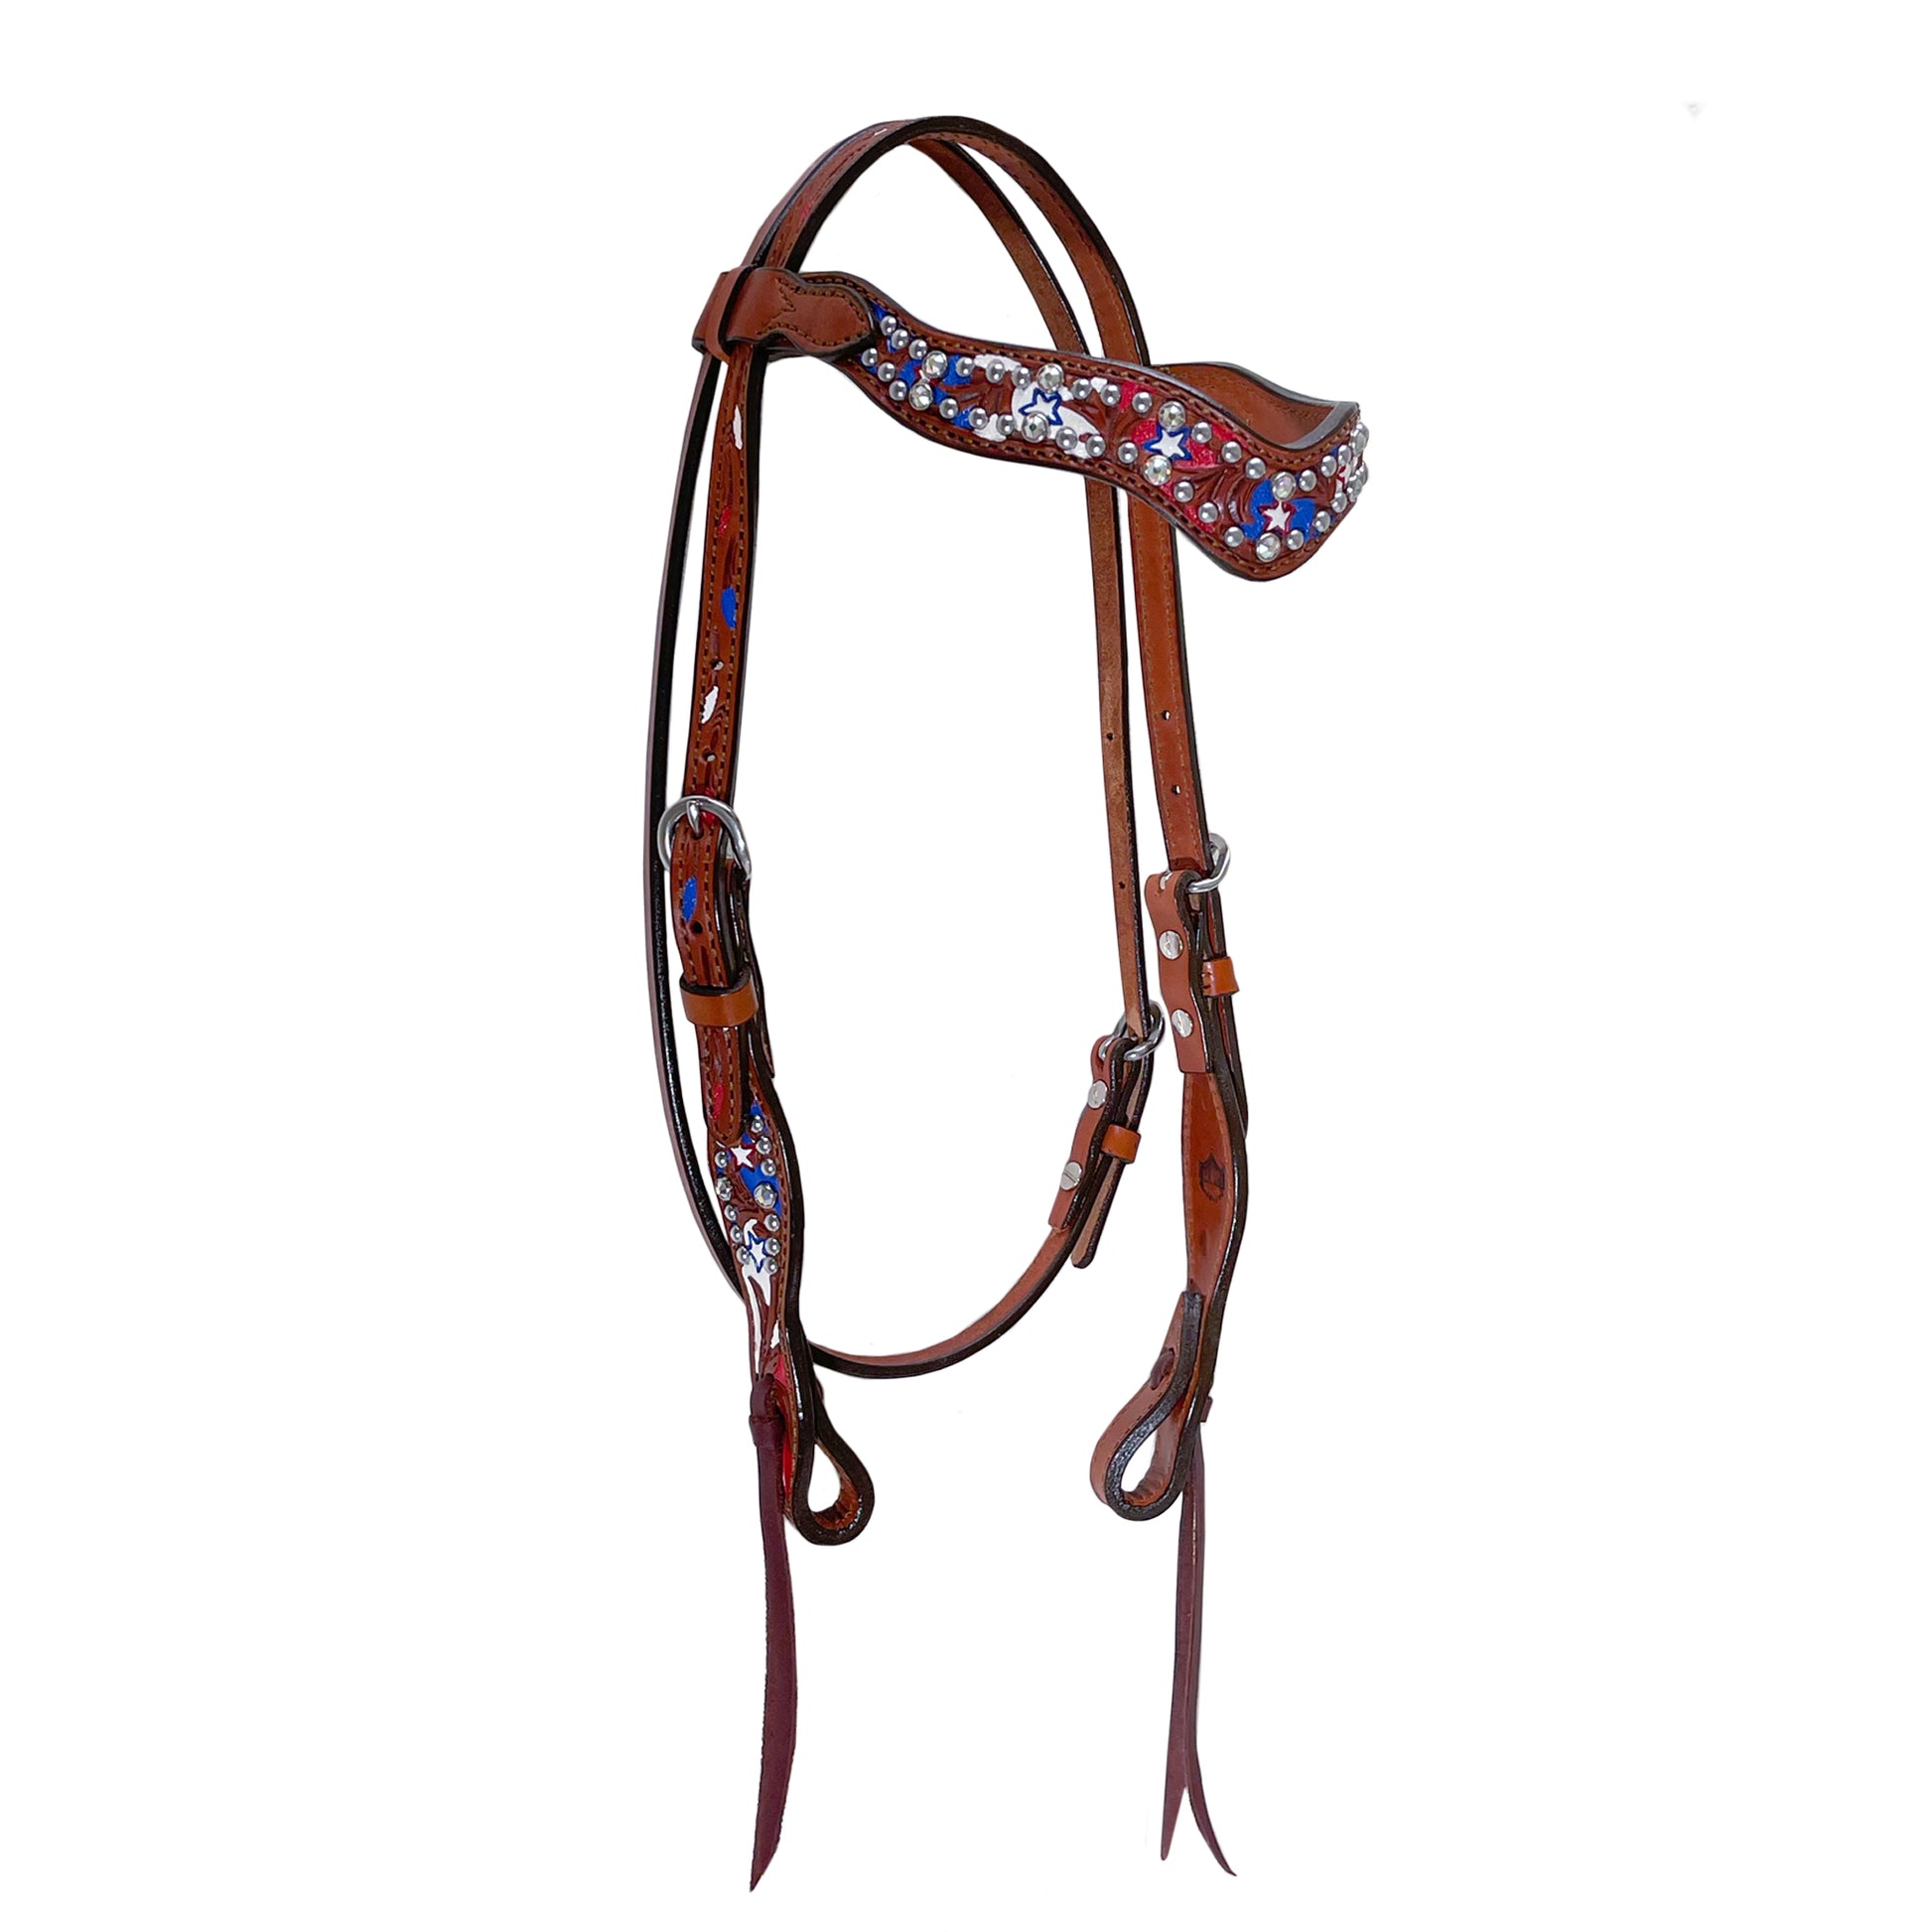 1-1/2" Wave browband headstall toast leather combo AA/star tooling with multicolored background paint, Swarovski crystals, and SS spots.